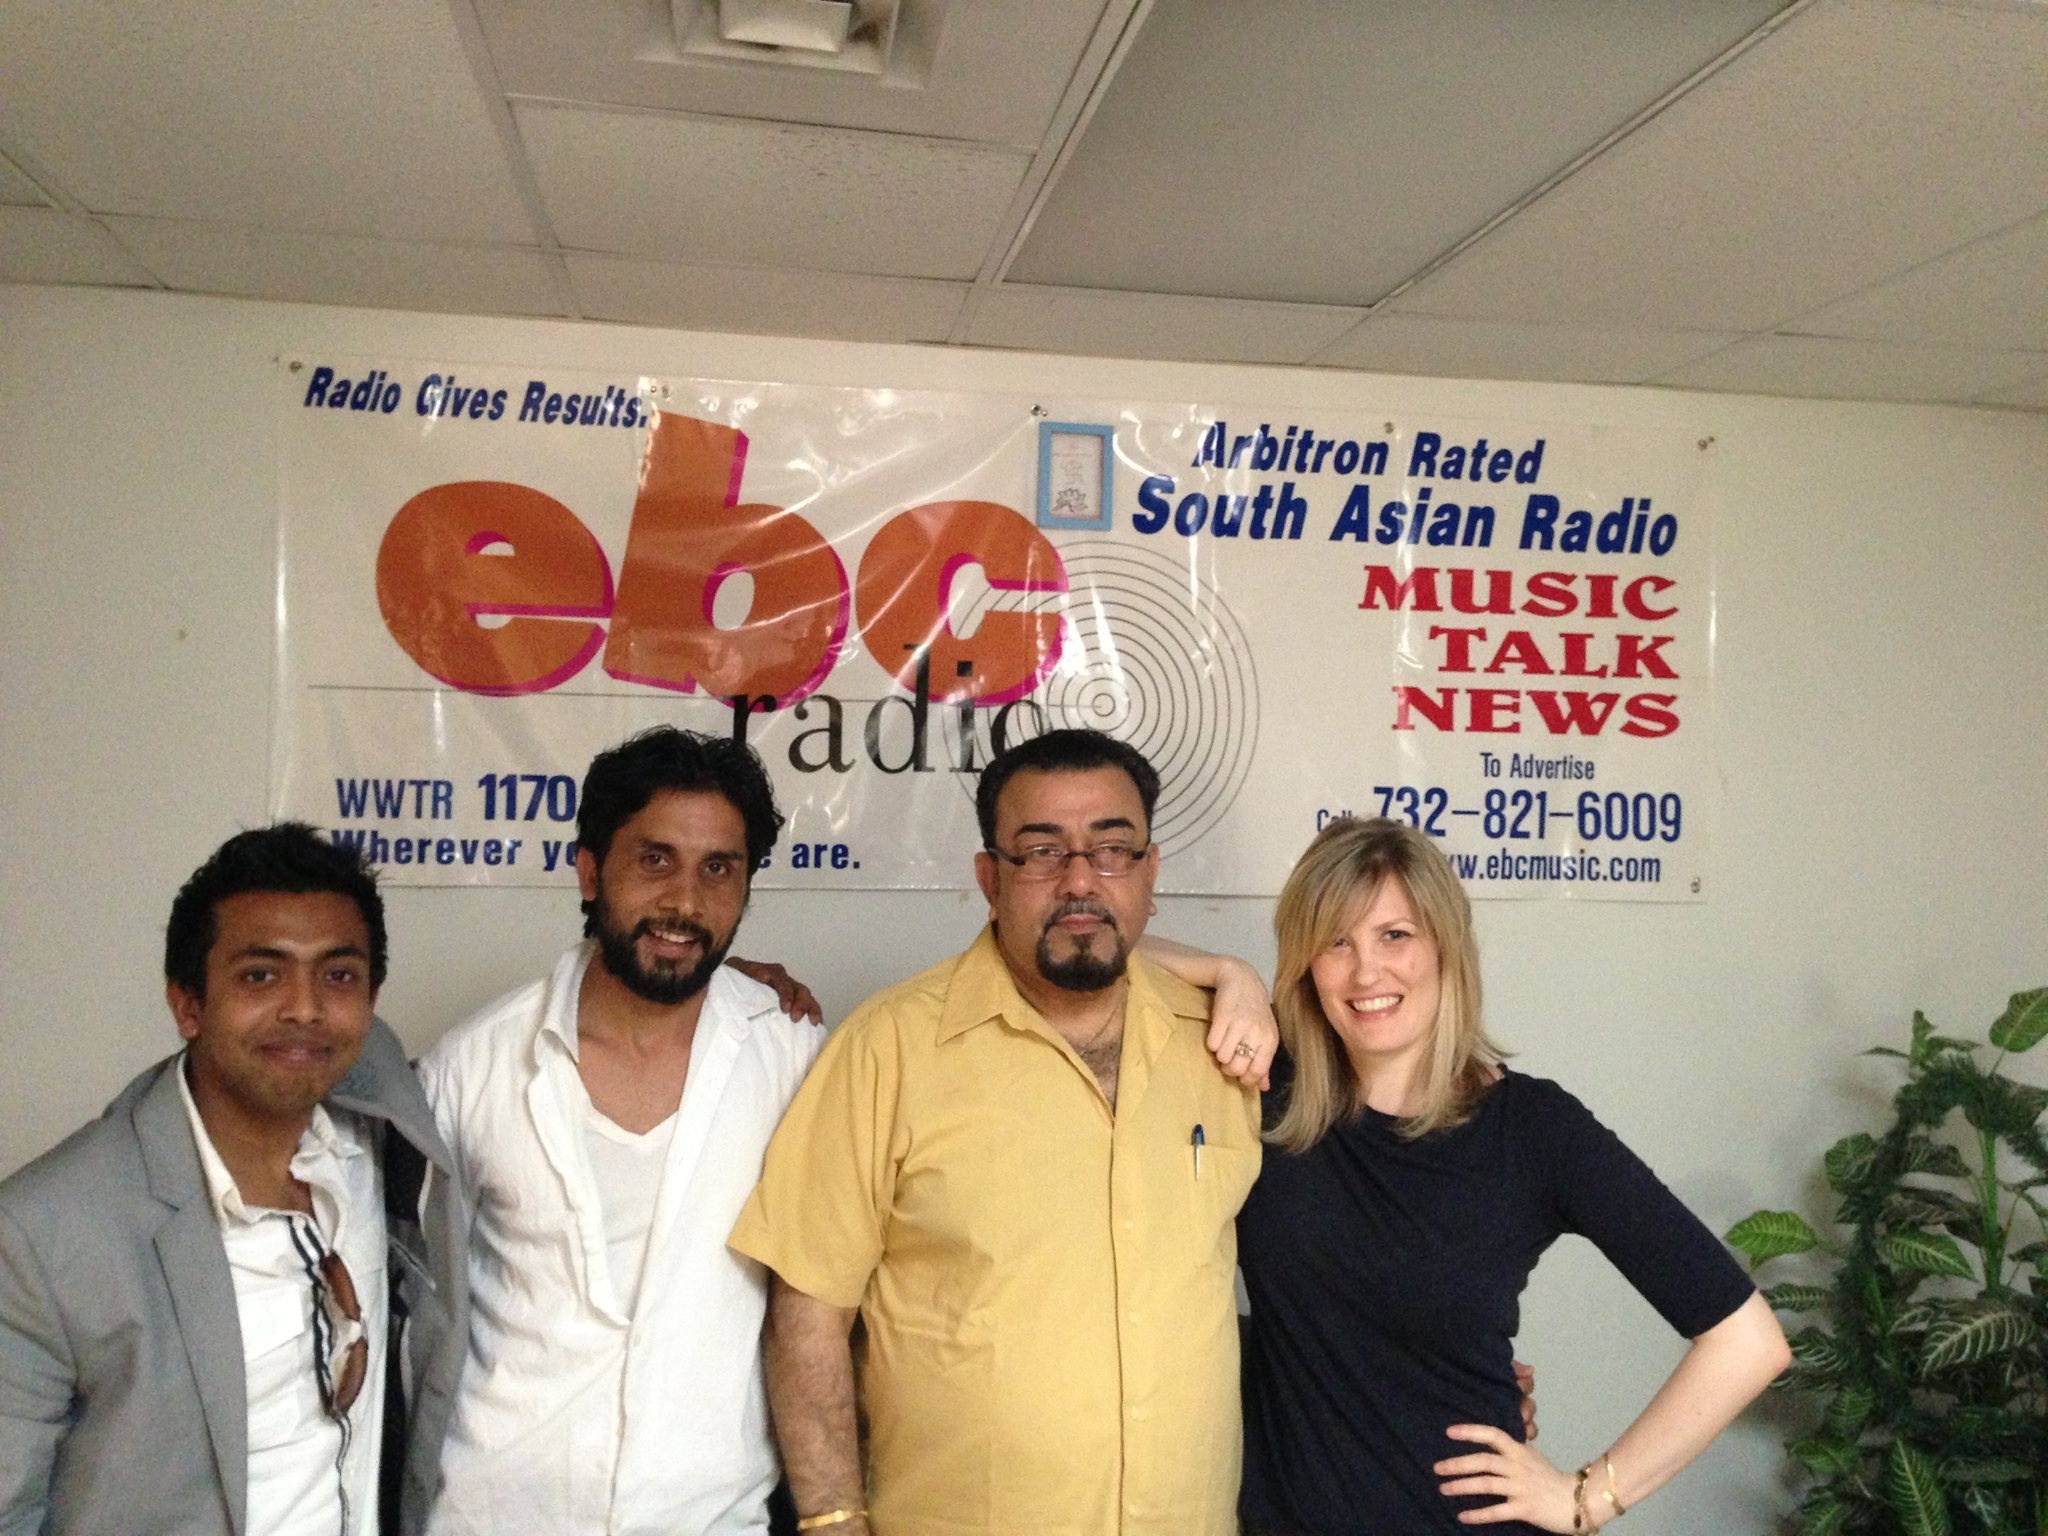 Ashok Chaudhary with Di , kulraaj and Shane after the interview for EBC Radio for an off Broadwy play 